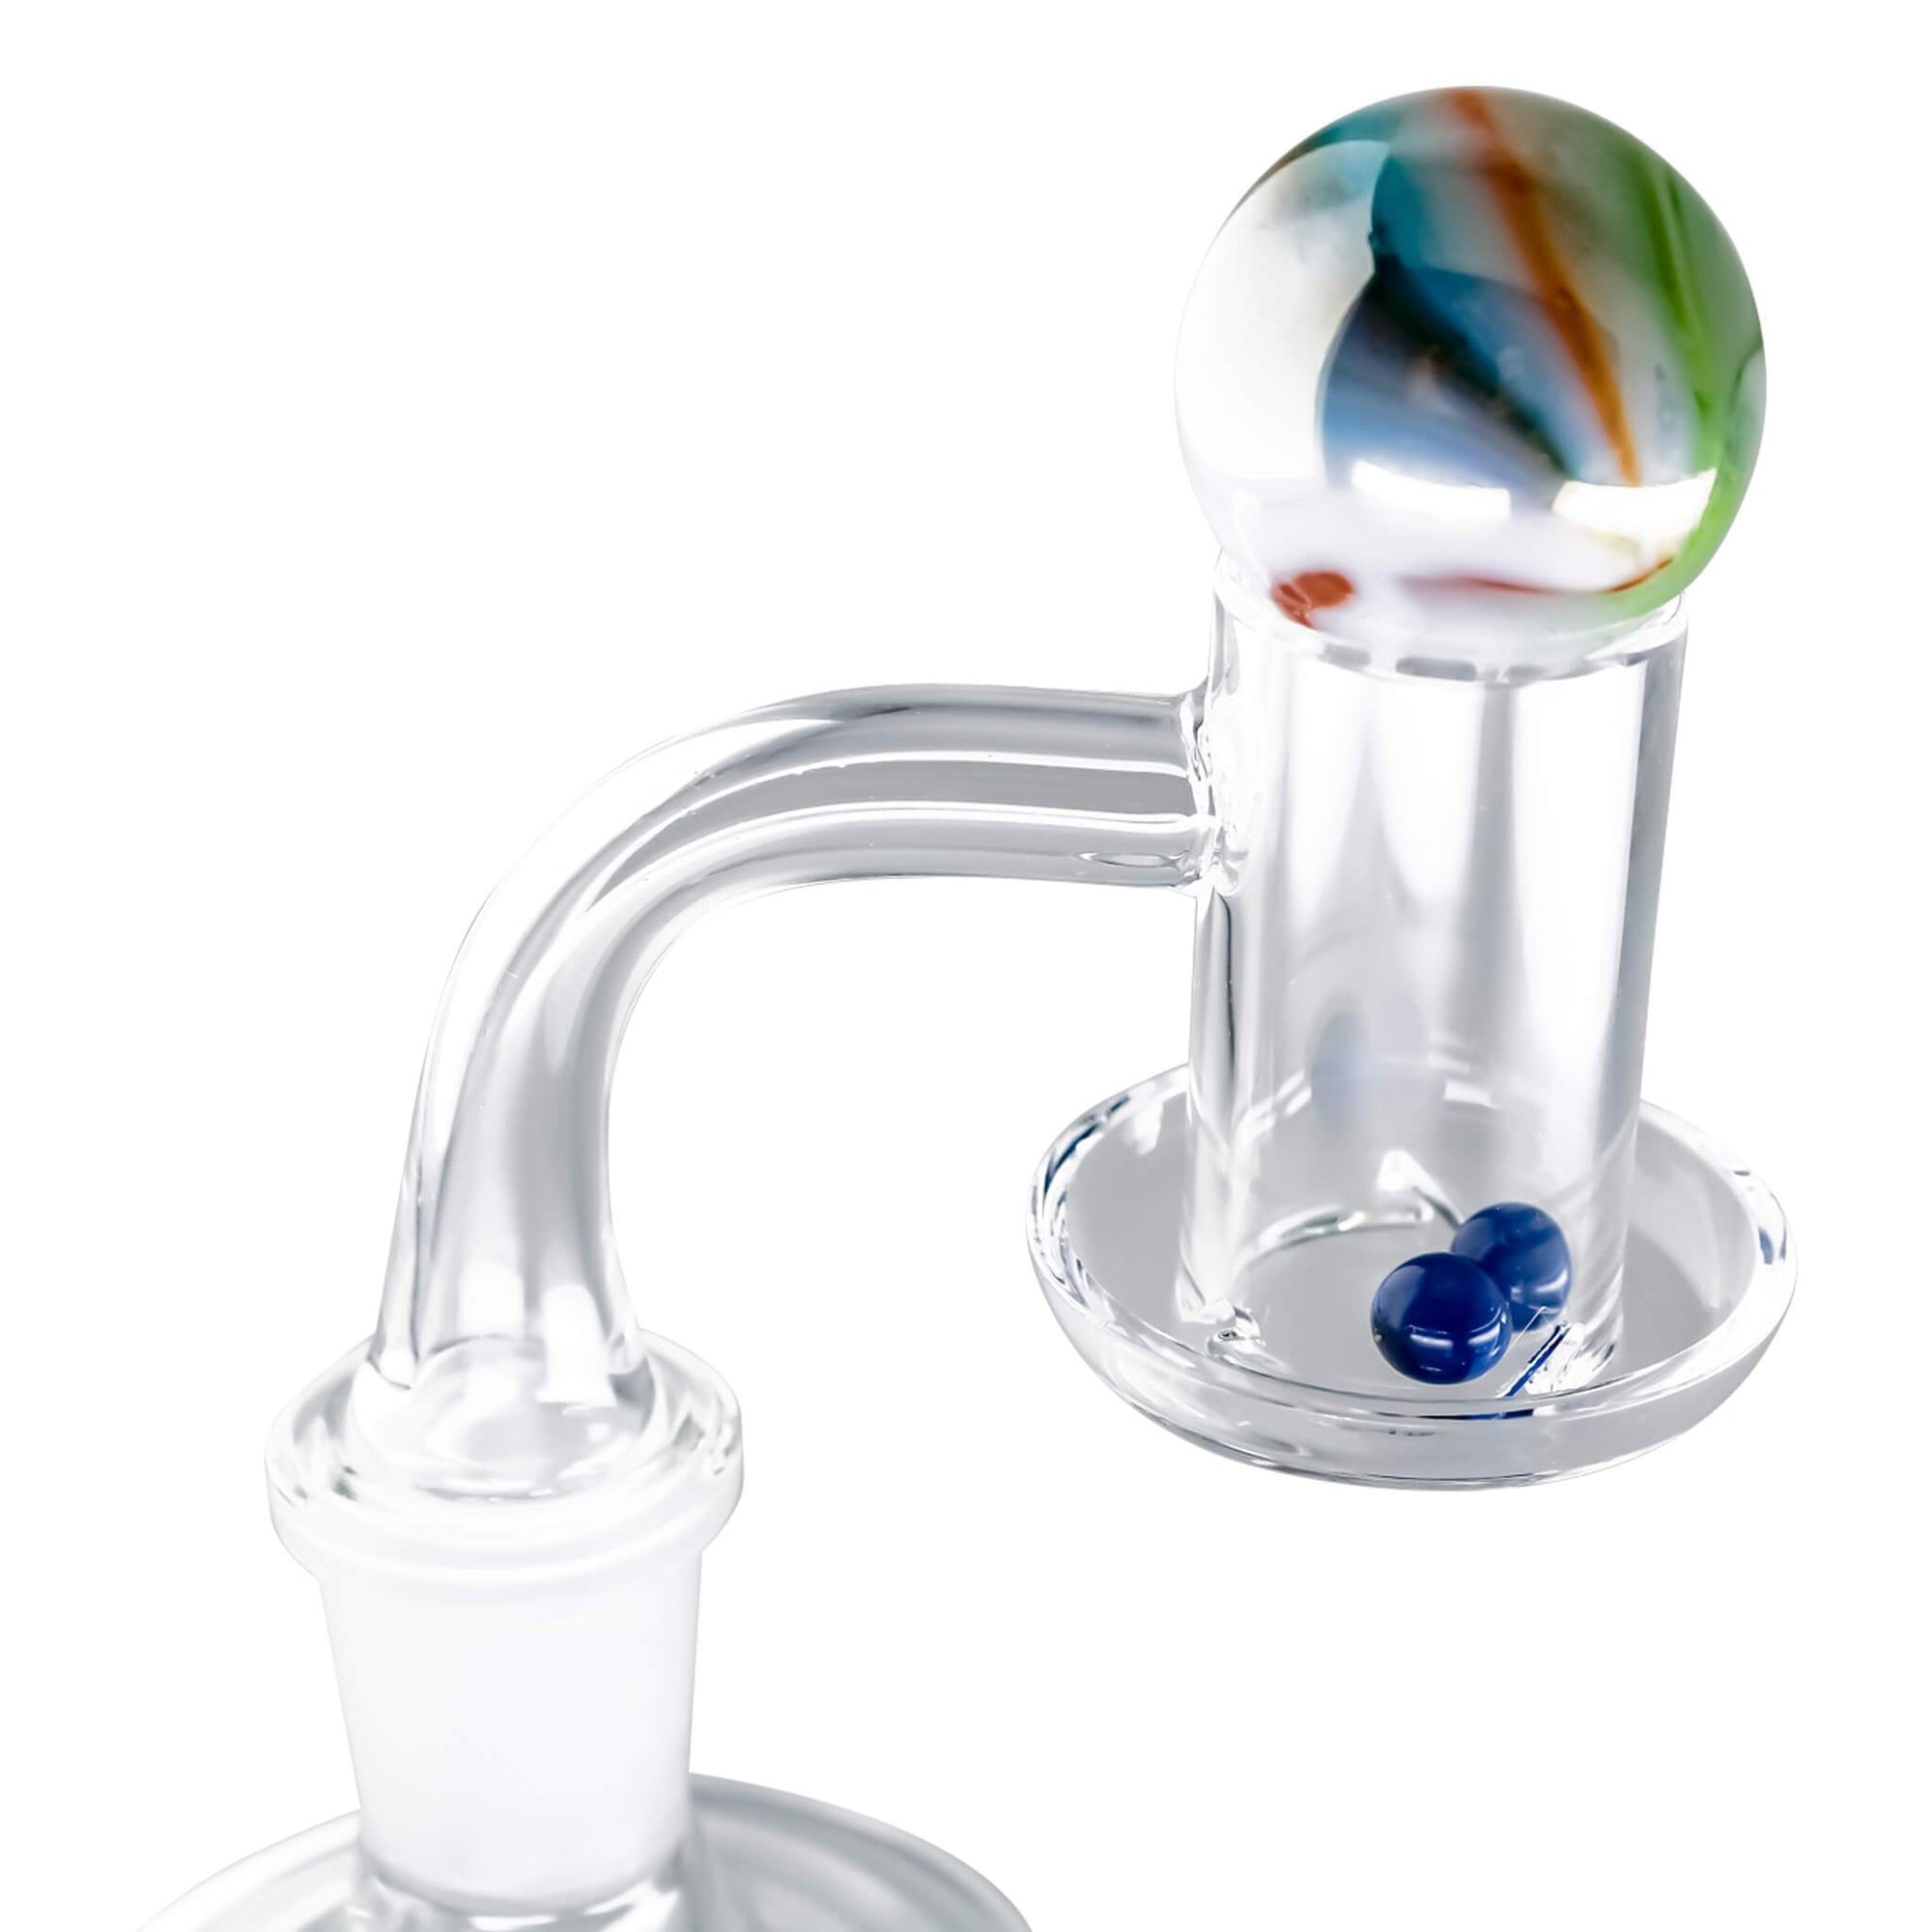 20mm Hybrid Terp Slurp Blender | Full Stack View | the dabbing specialists